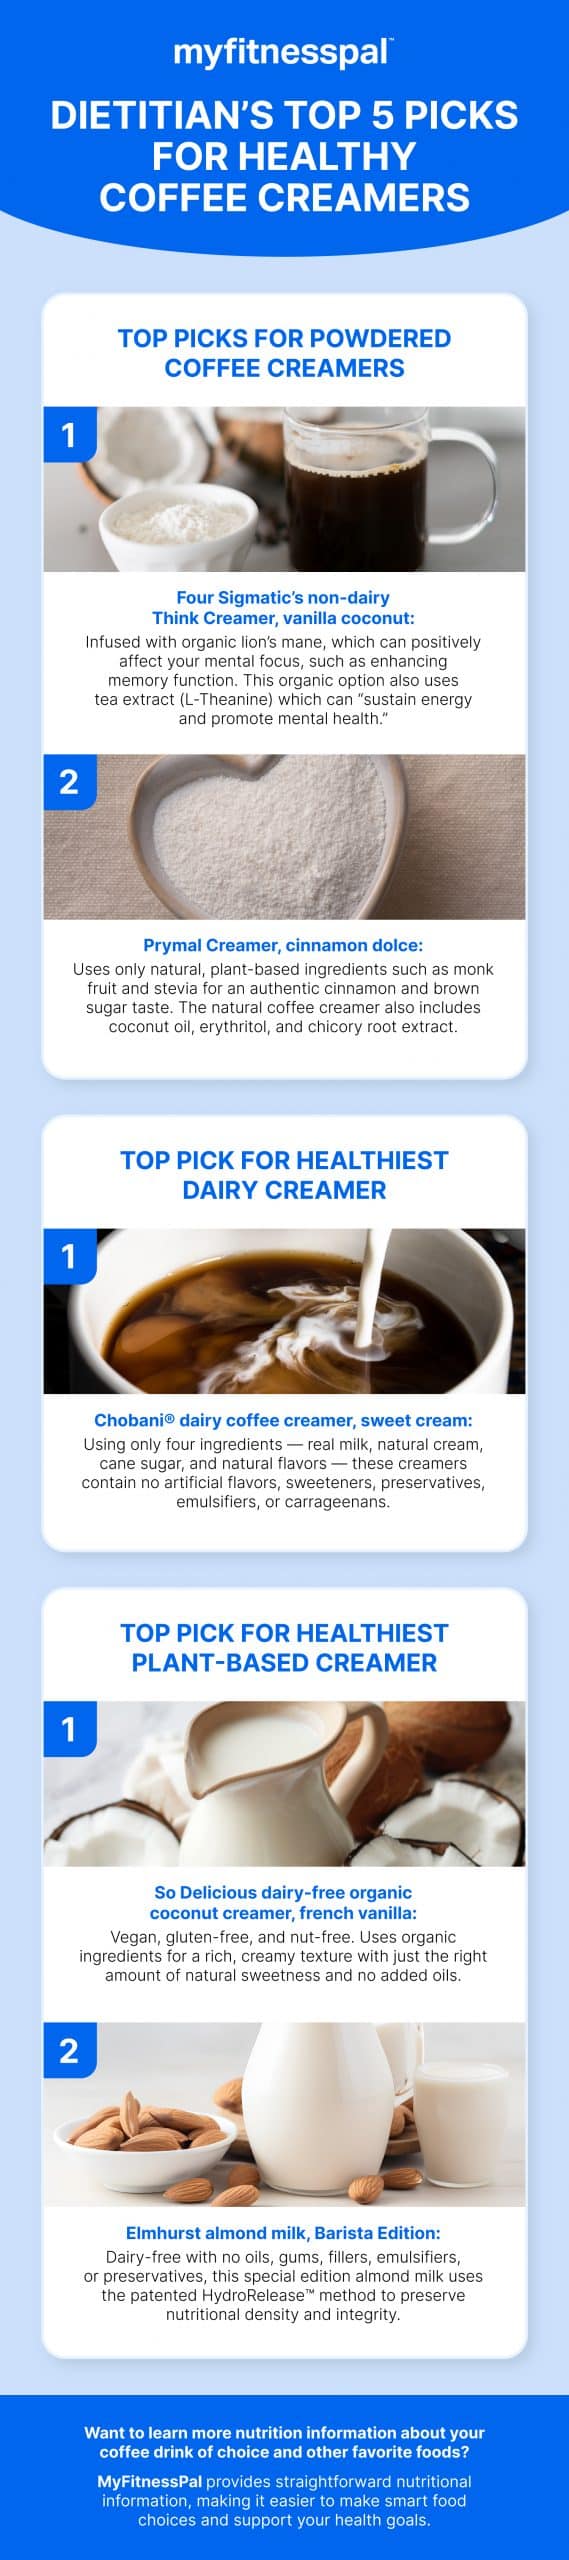 What Are the Healthiest Coffee Creamers? INFOGRAPHIC